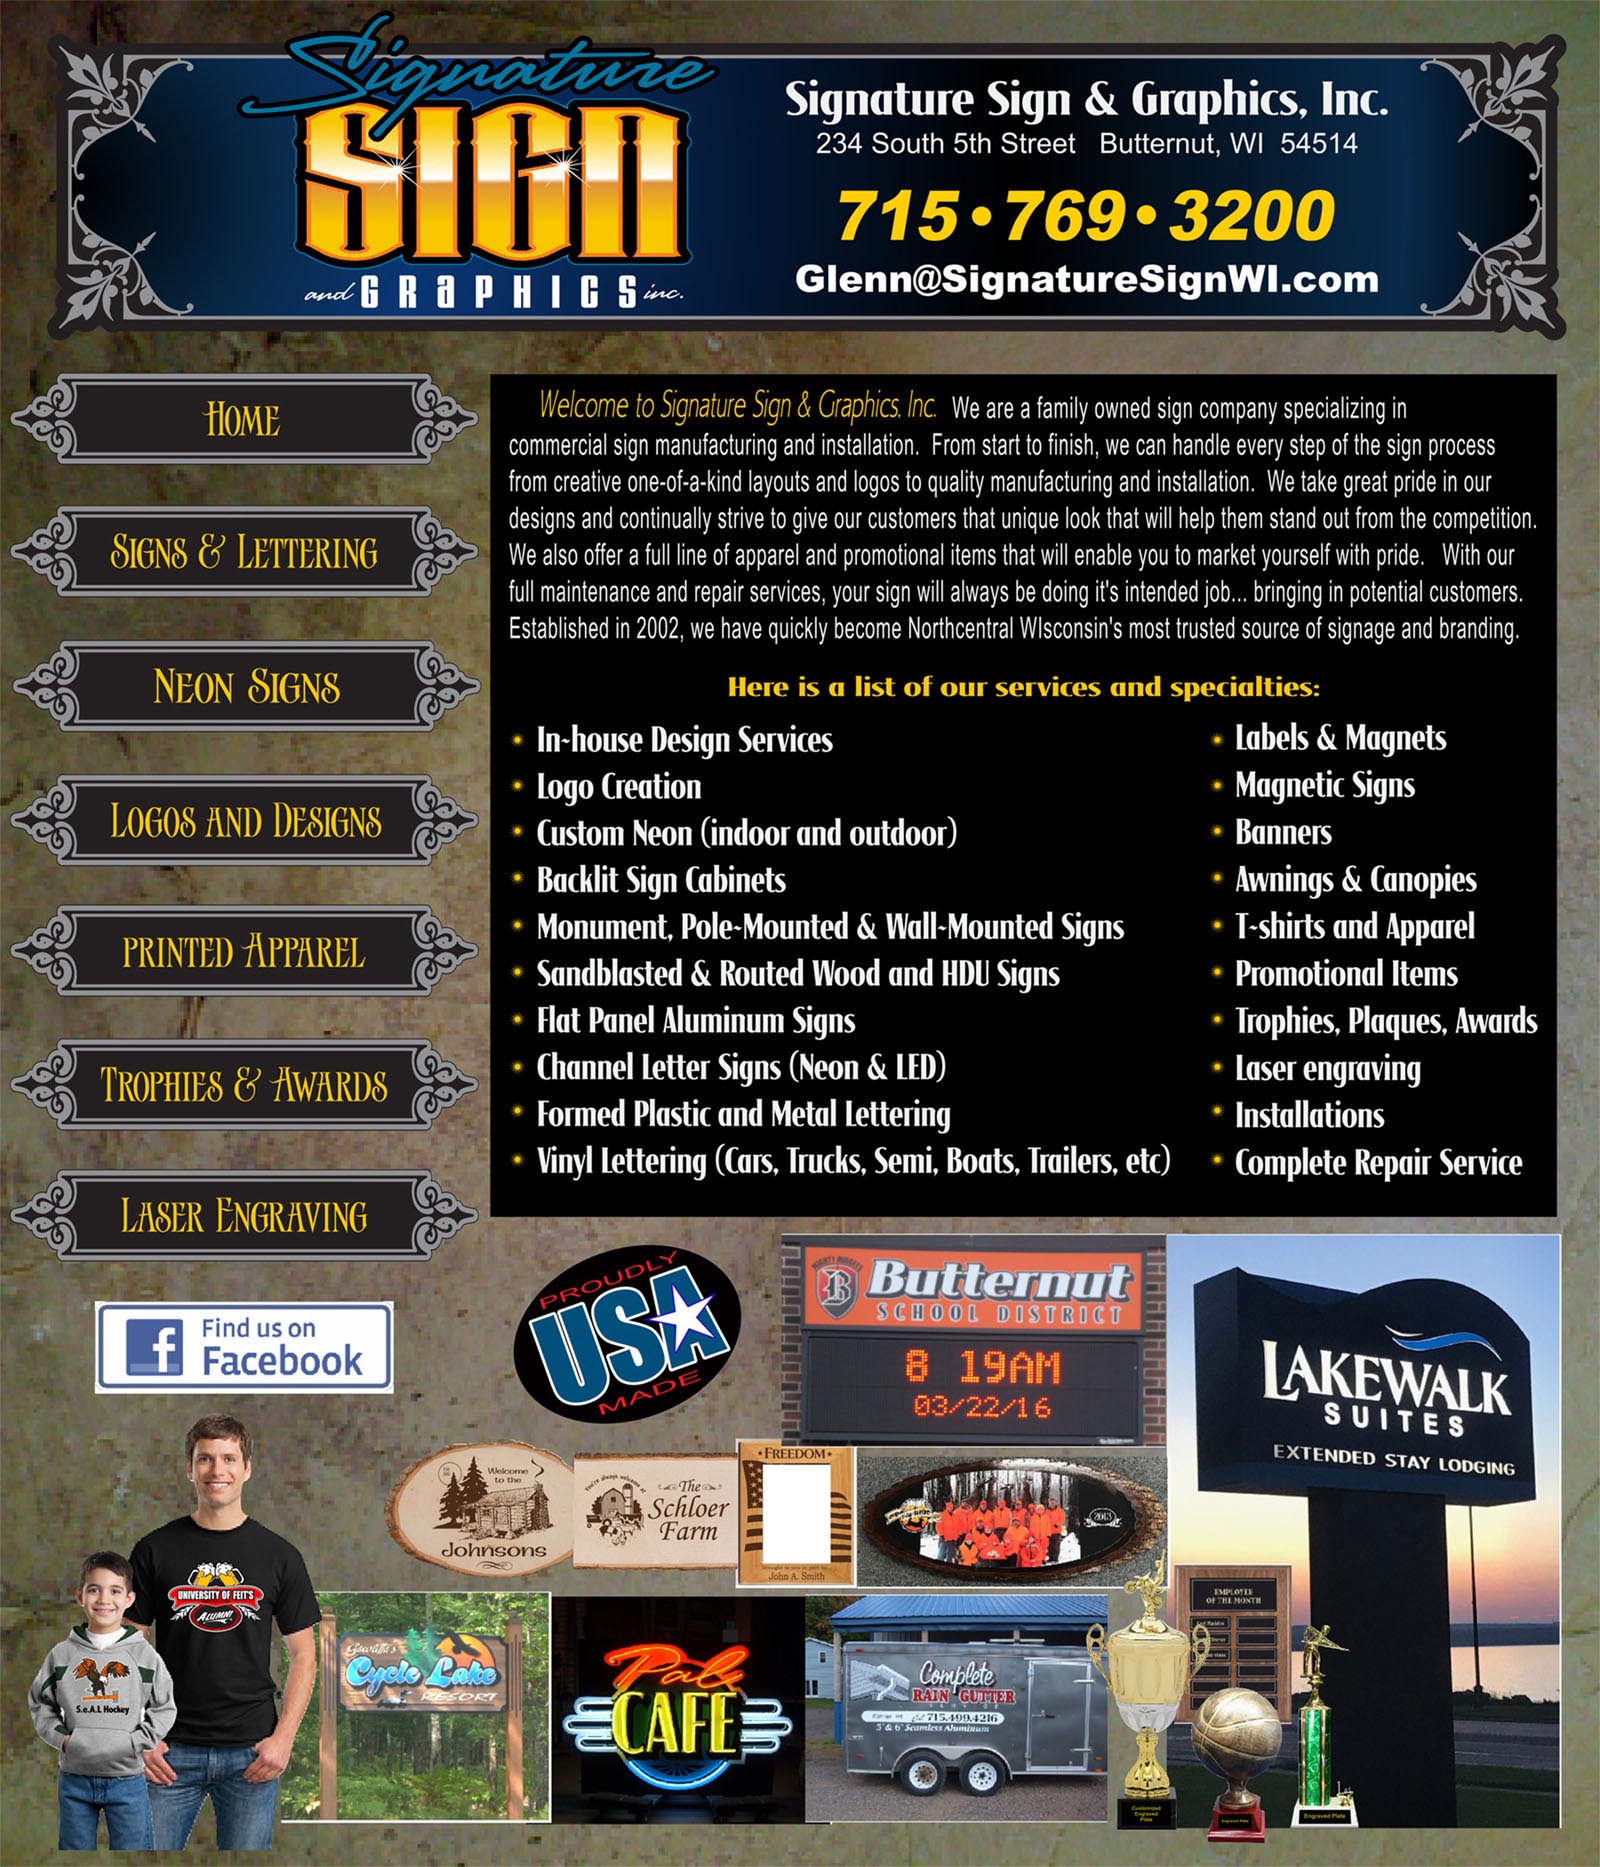 Welcome to Signature Sign & Graphics.  We are a family owned sign company specializing in commercial sign manufacturing and installation. From start to finish, we can handle every step of the sign process from creative one-of-a-kind layouts and logos to quality manufacturing and installation.  We take great pride in our designs and continually strive to give our customers that unique look that will help them stand out from the competition.  We also offer a full line of apparel and promotional items that will enable you to market yourself with pride.  With our full maintenance and repair services, your sign will always be doing it's intended job - bringing in potential customers. Here is a lis of our services and specialties: in-house design services, logo creation, custom neon, backlit sign cabinets, monument signs, pole-mounted and wall mounted signs sandblasted and routed wood and hdu signs, flat panel aluminum signs, channel letter signs, labels and magnets, magnetic signs, banners, awnings and canopies, t-shirts and apparel, promotional items, trophies, plaques awards, laser engraving, formed plastic and metal lettering, installations, vinyl lettering.